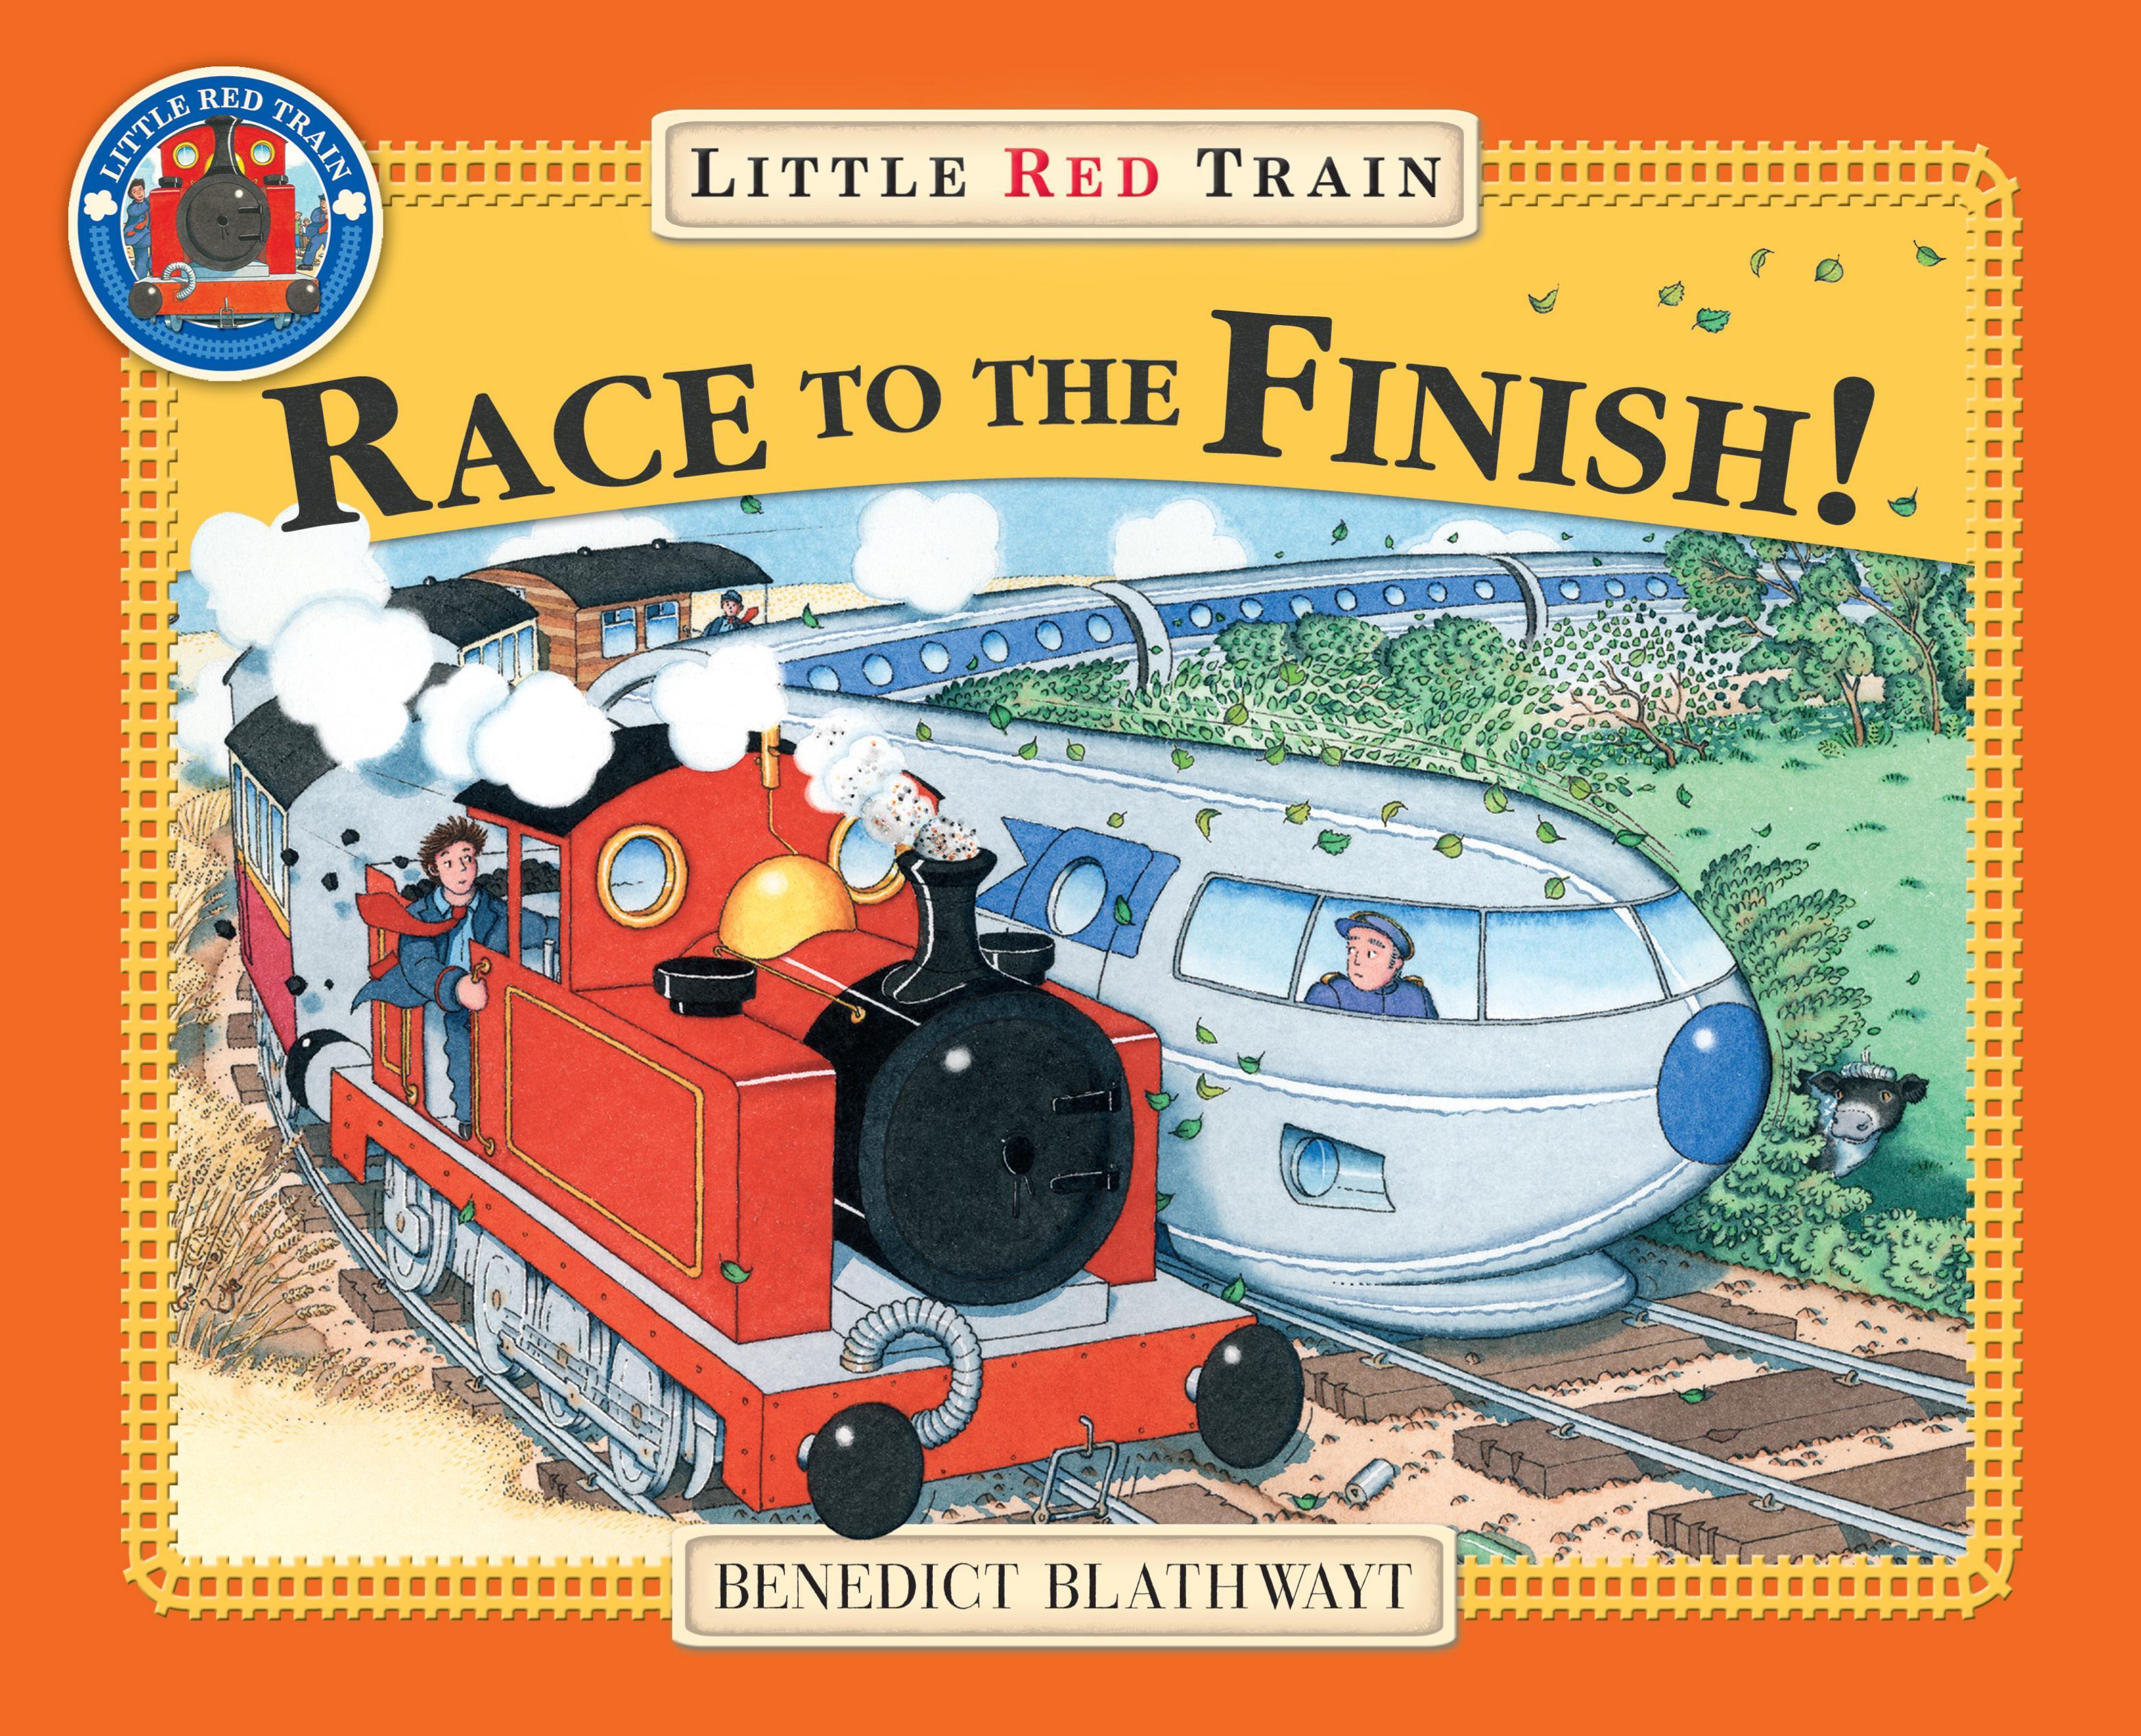 Little Red Train's Race to the Finish - Benedict Blathwayt